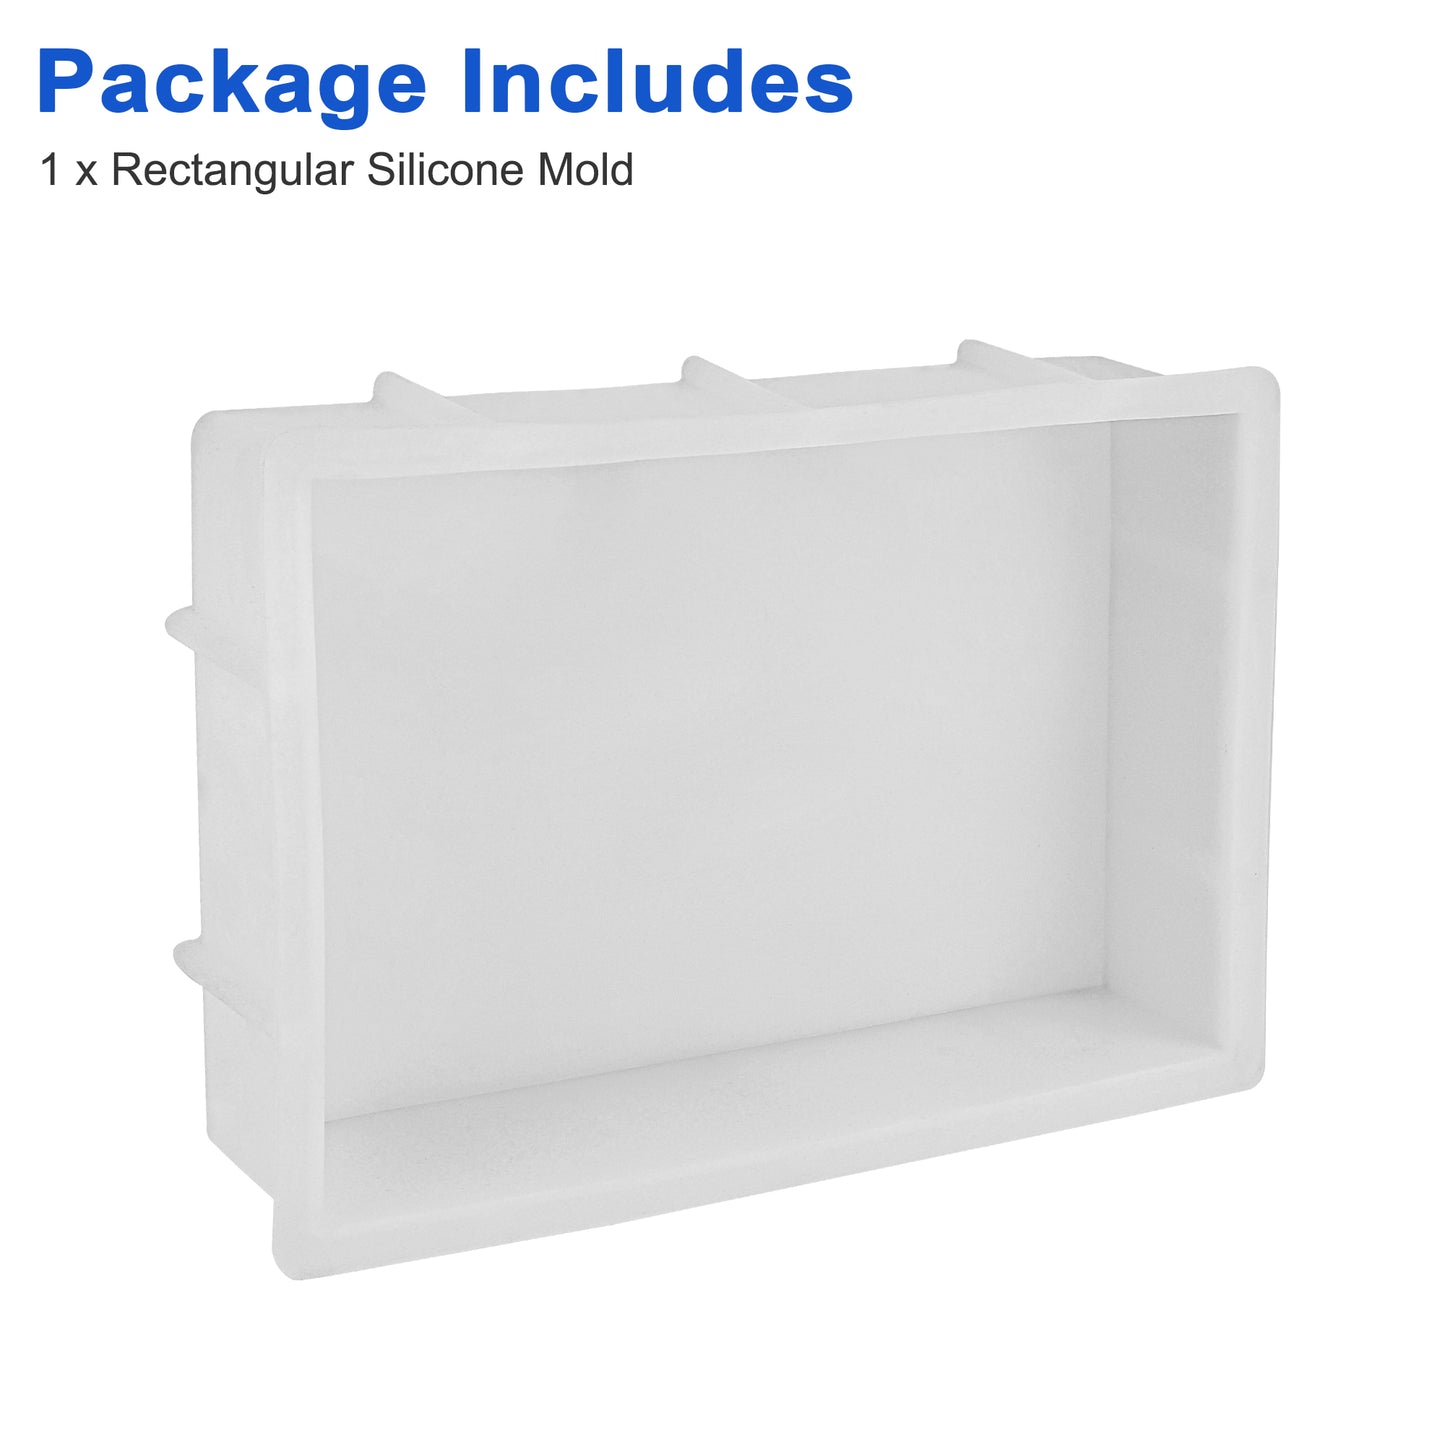 Resin Molds - Large Rectangle Silicone Molds for DIY Resin Crafts